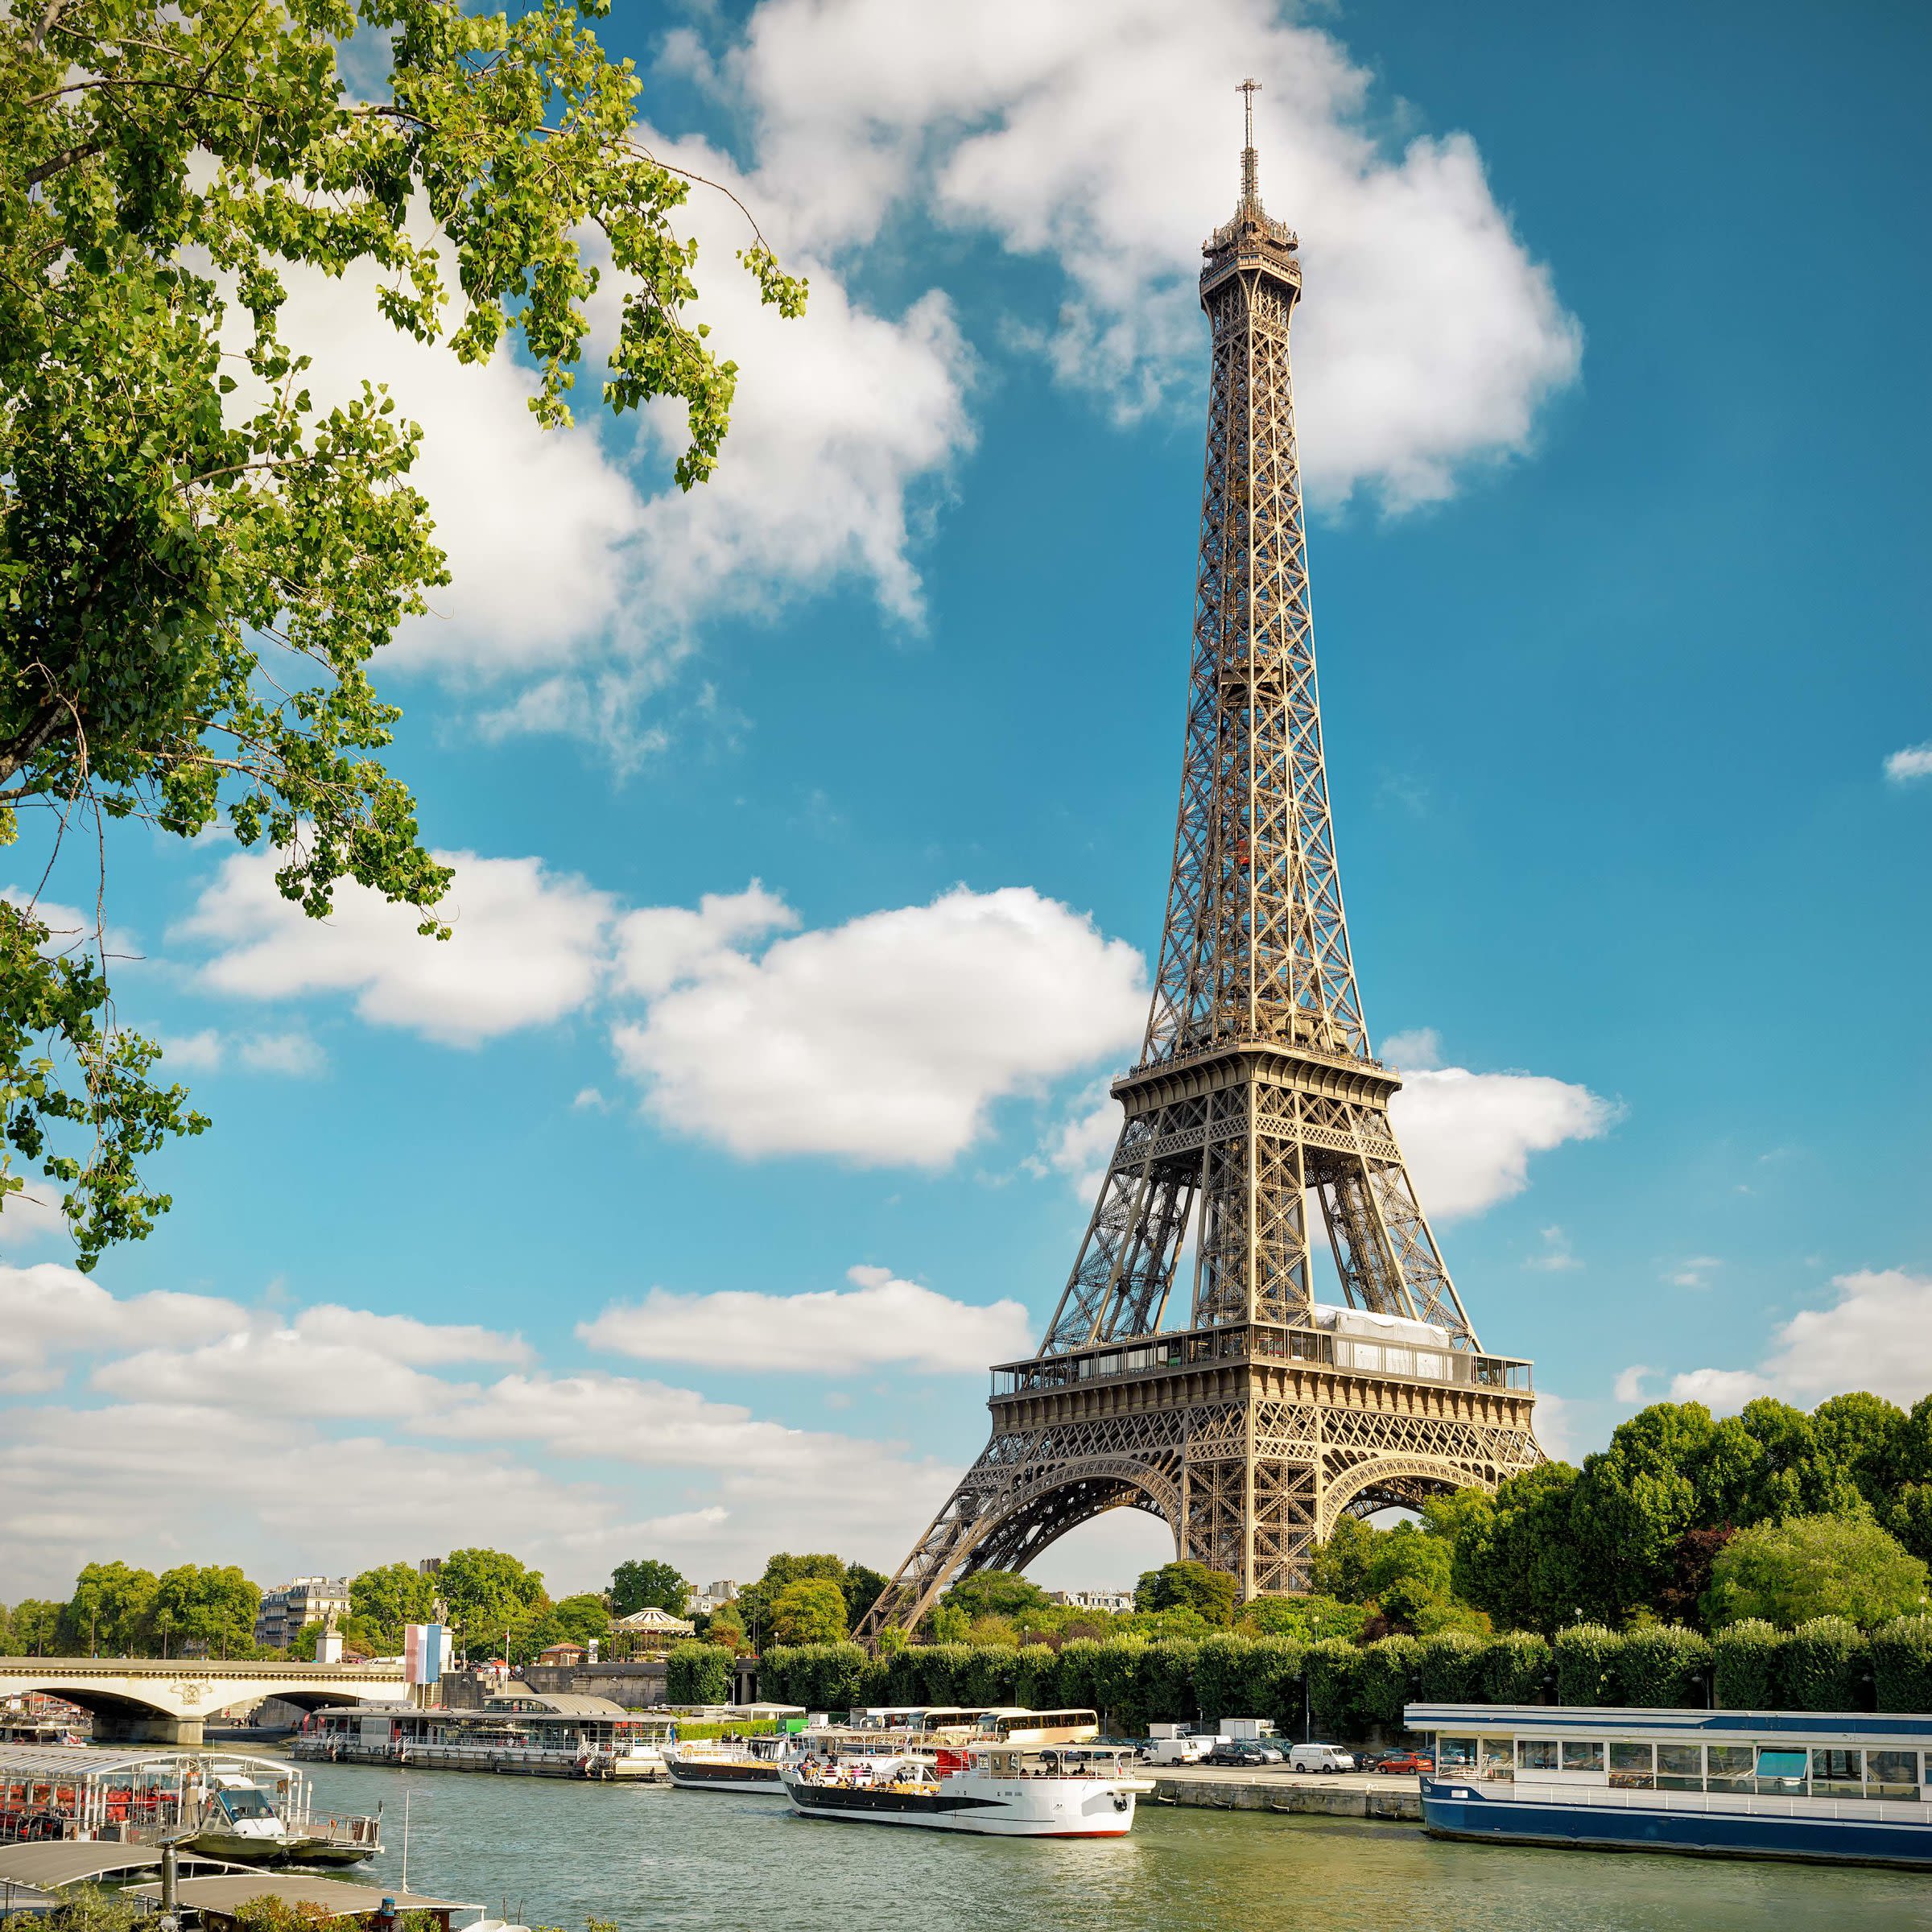 Luxurious getaway : a 6 day honeymoon itinerary for Paris